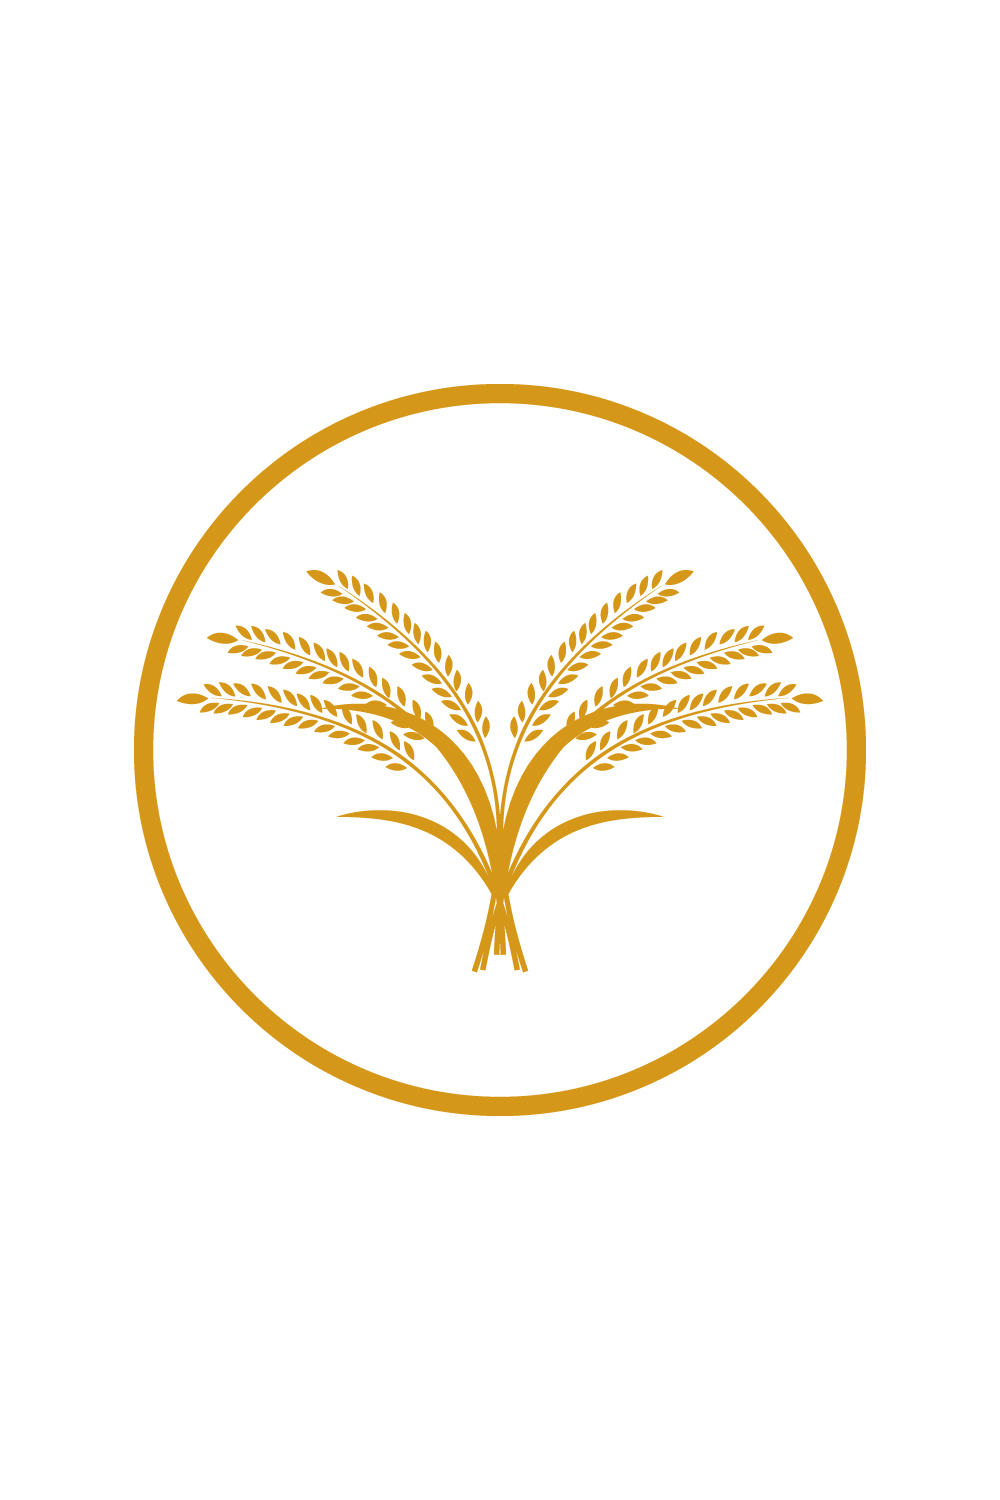 Agriculture Wheat rice food logo design Paddy logo design vector icon Rice farming logo template illustration pinterest preview image.